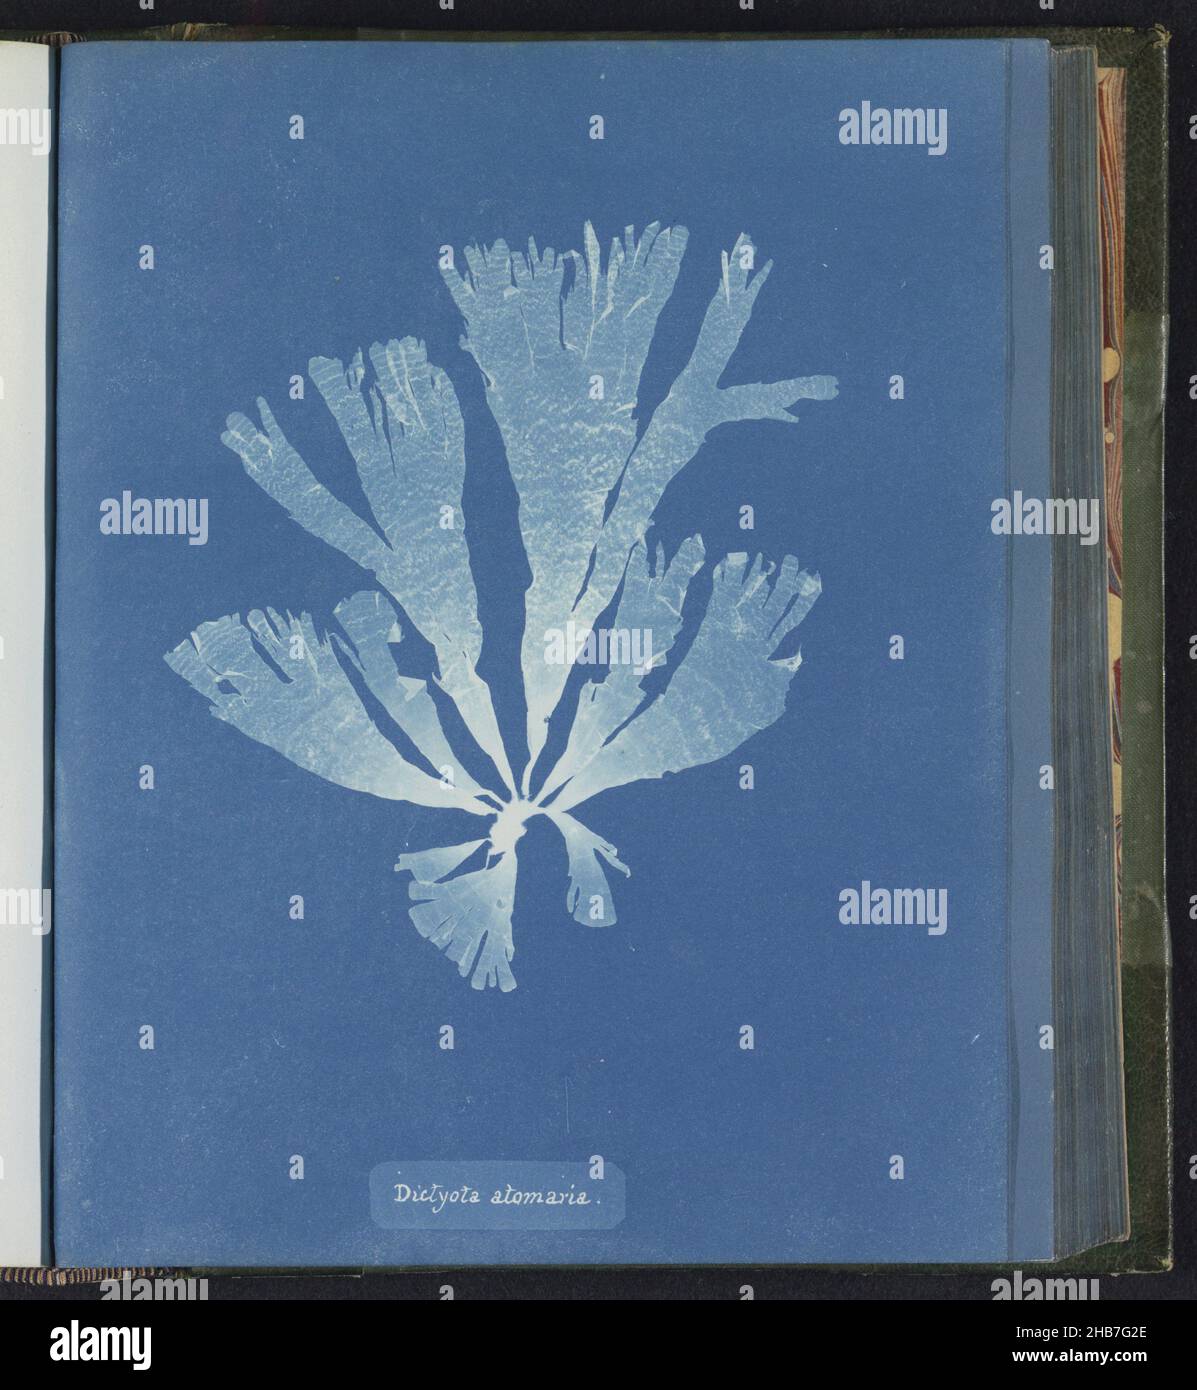 Dictyota atomaria, Anna Atkins, United Kingdom, c. 1843 - c. 1853, photographic support, cyanotype, height 250 mm × width 200 mm Stock Photo